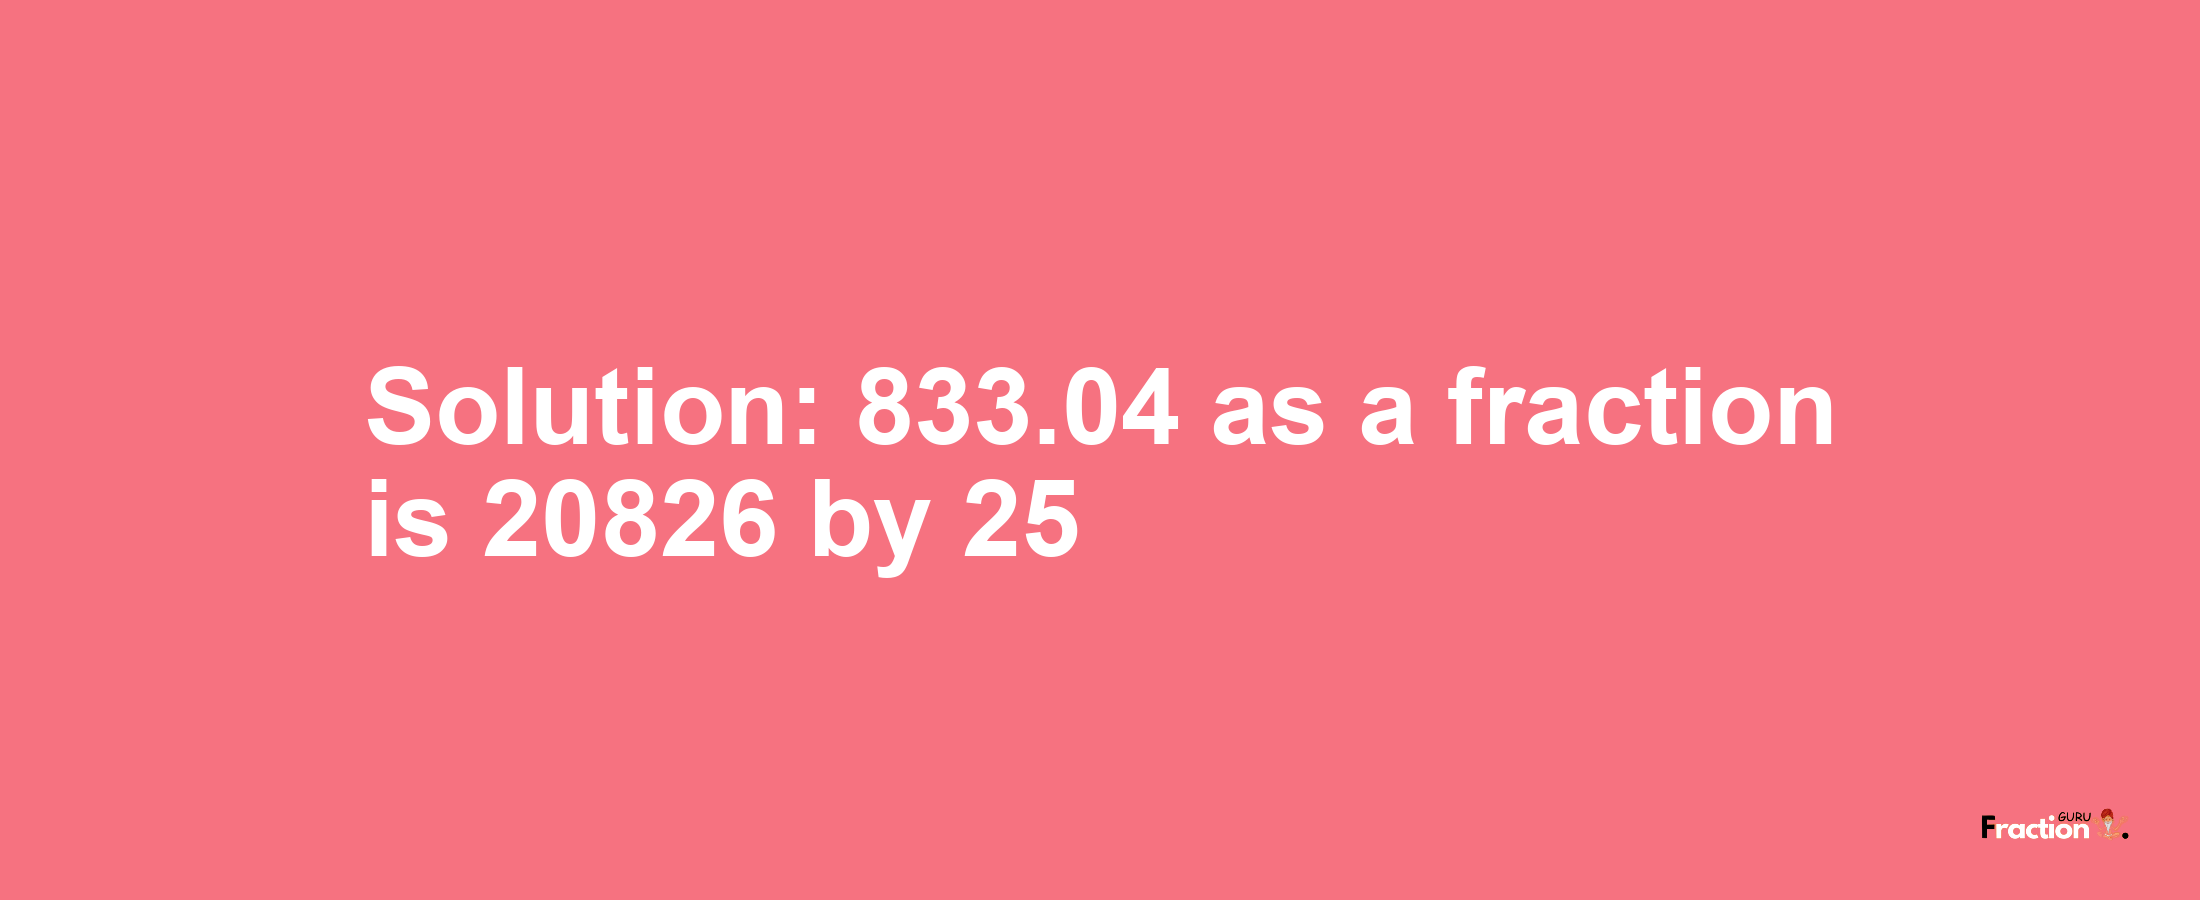 Solution:833.04 as a fraction is 20826/25